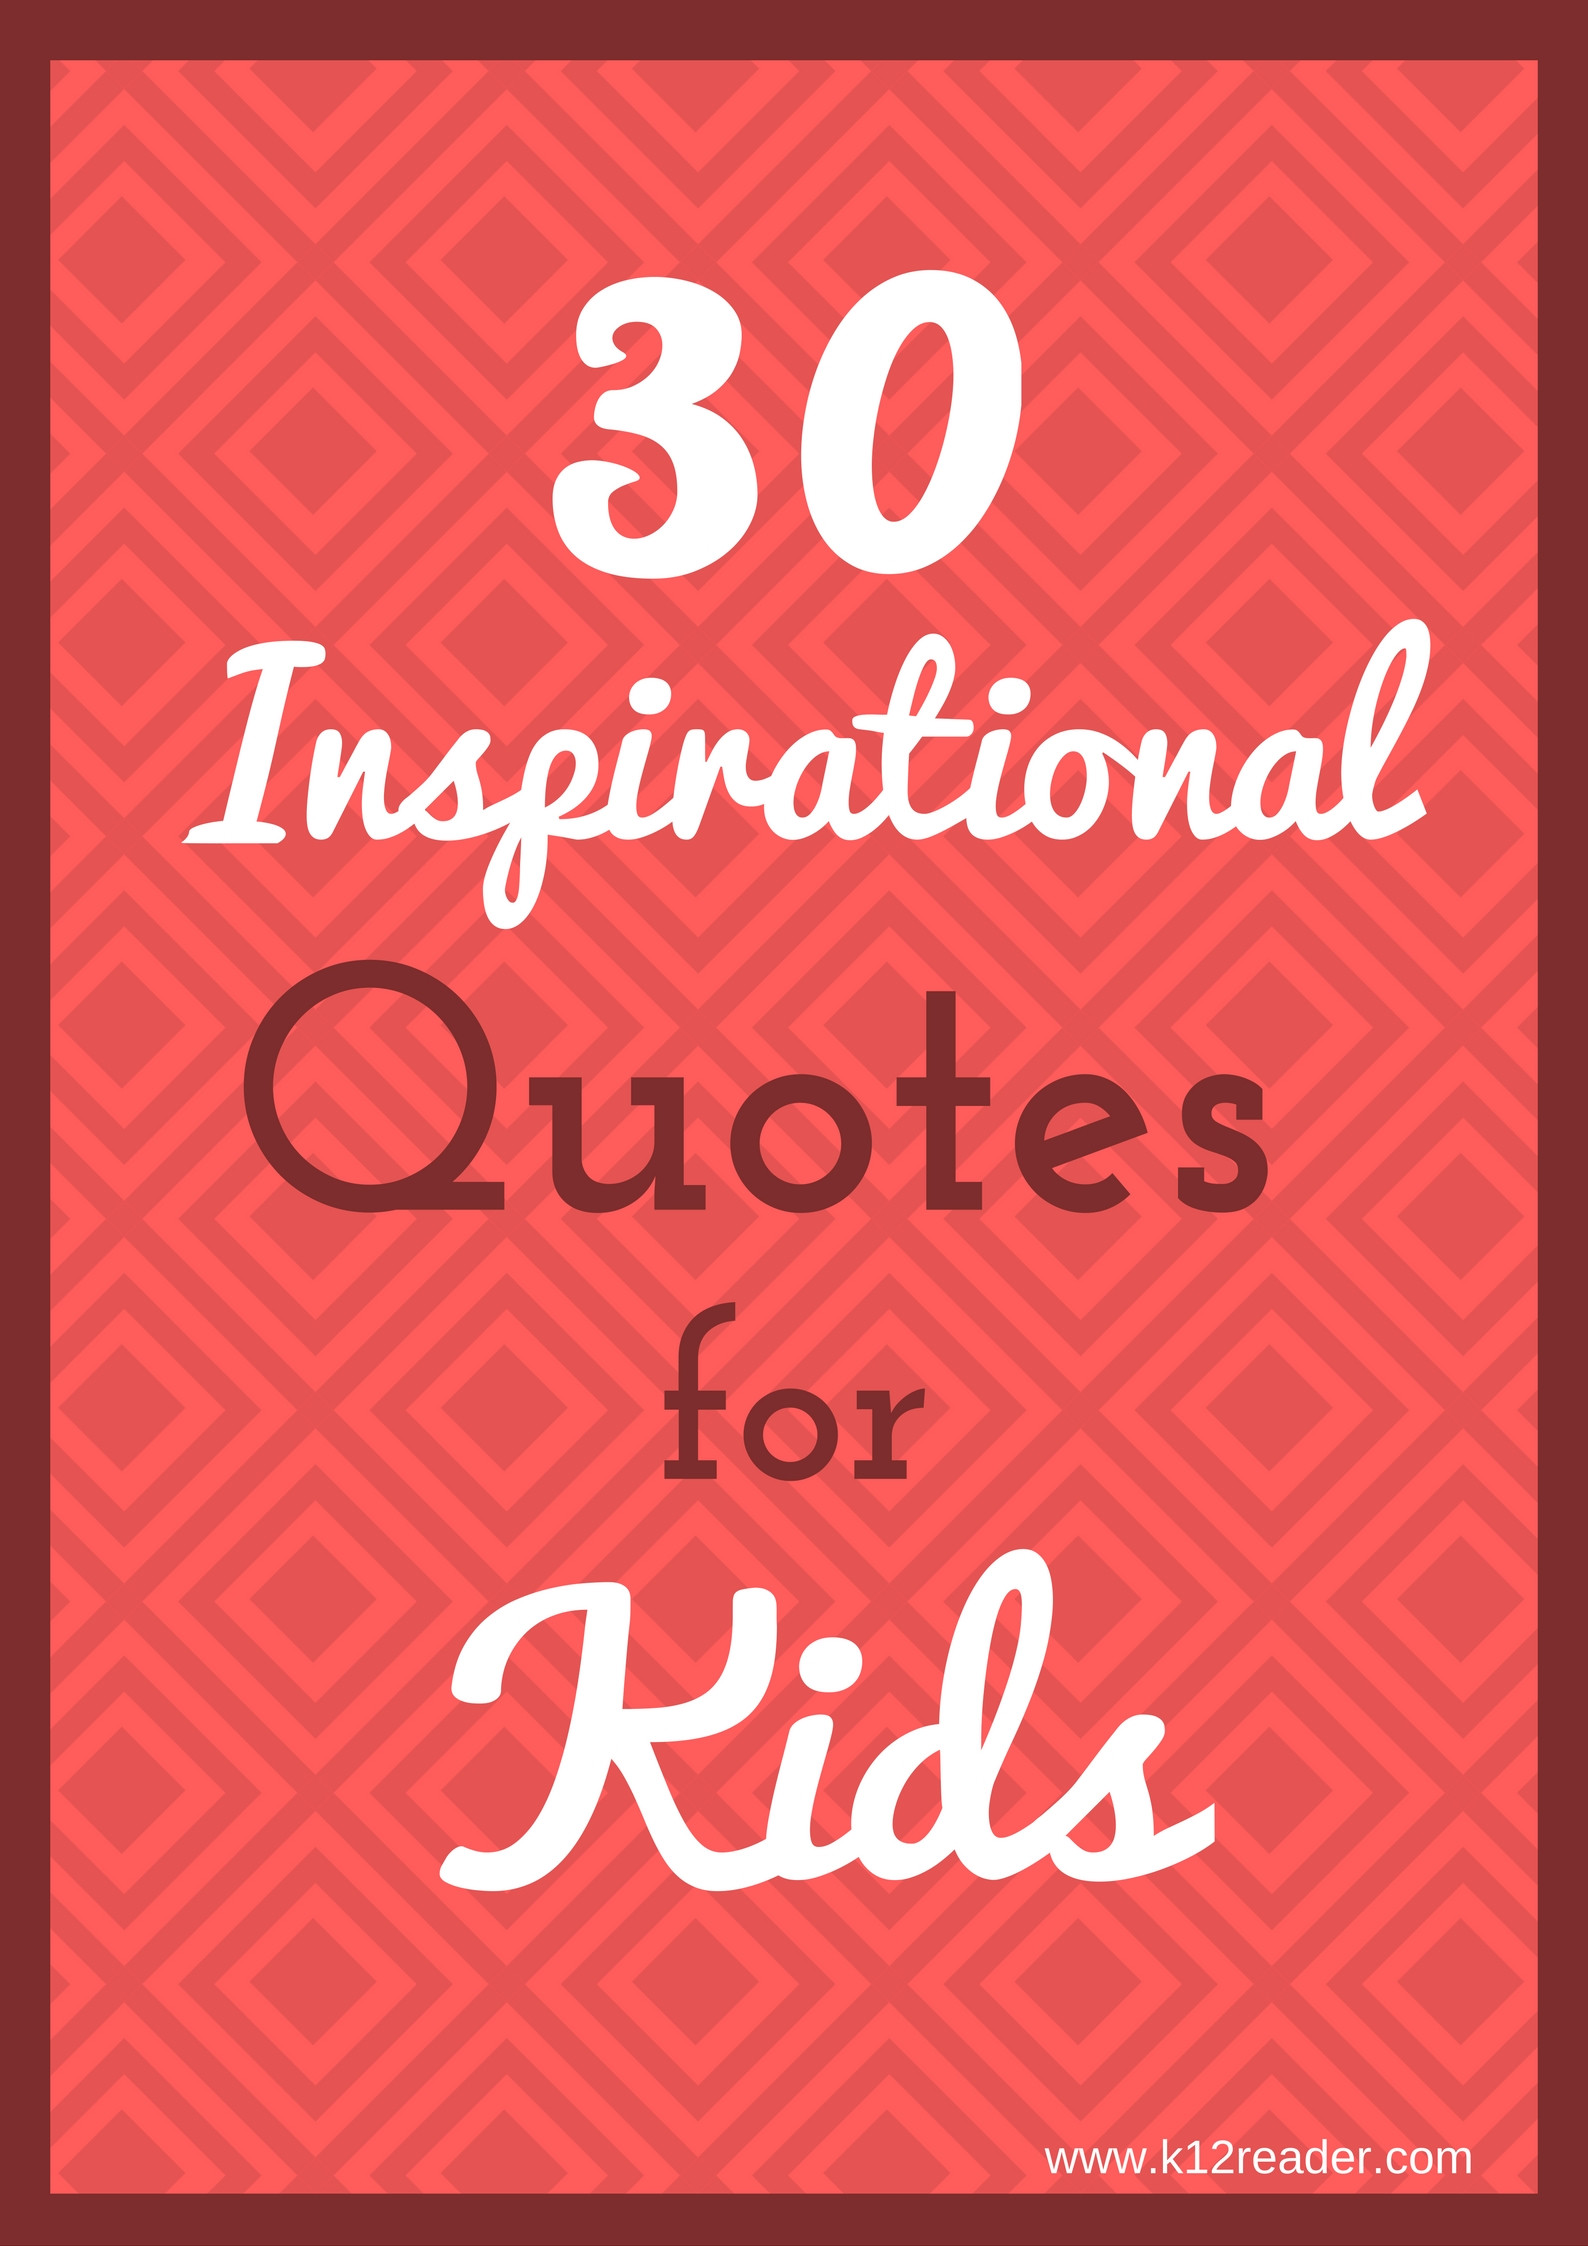 Inspirational Quote For Kids
 30 Inspirational Quotes for Kids